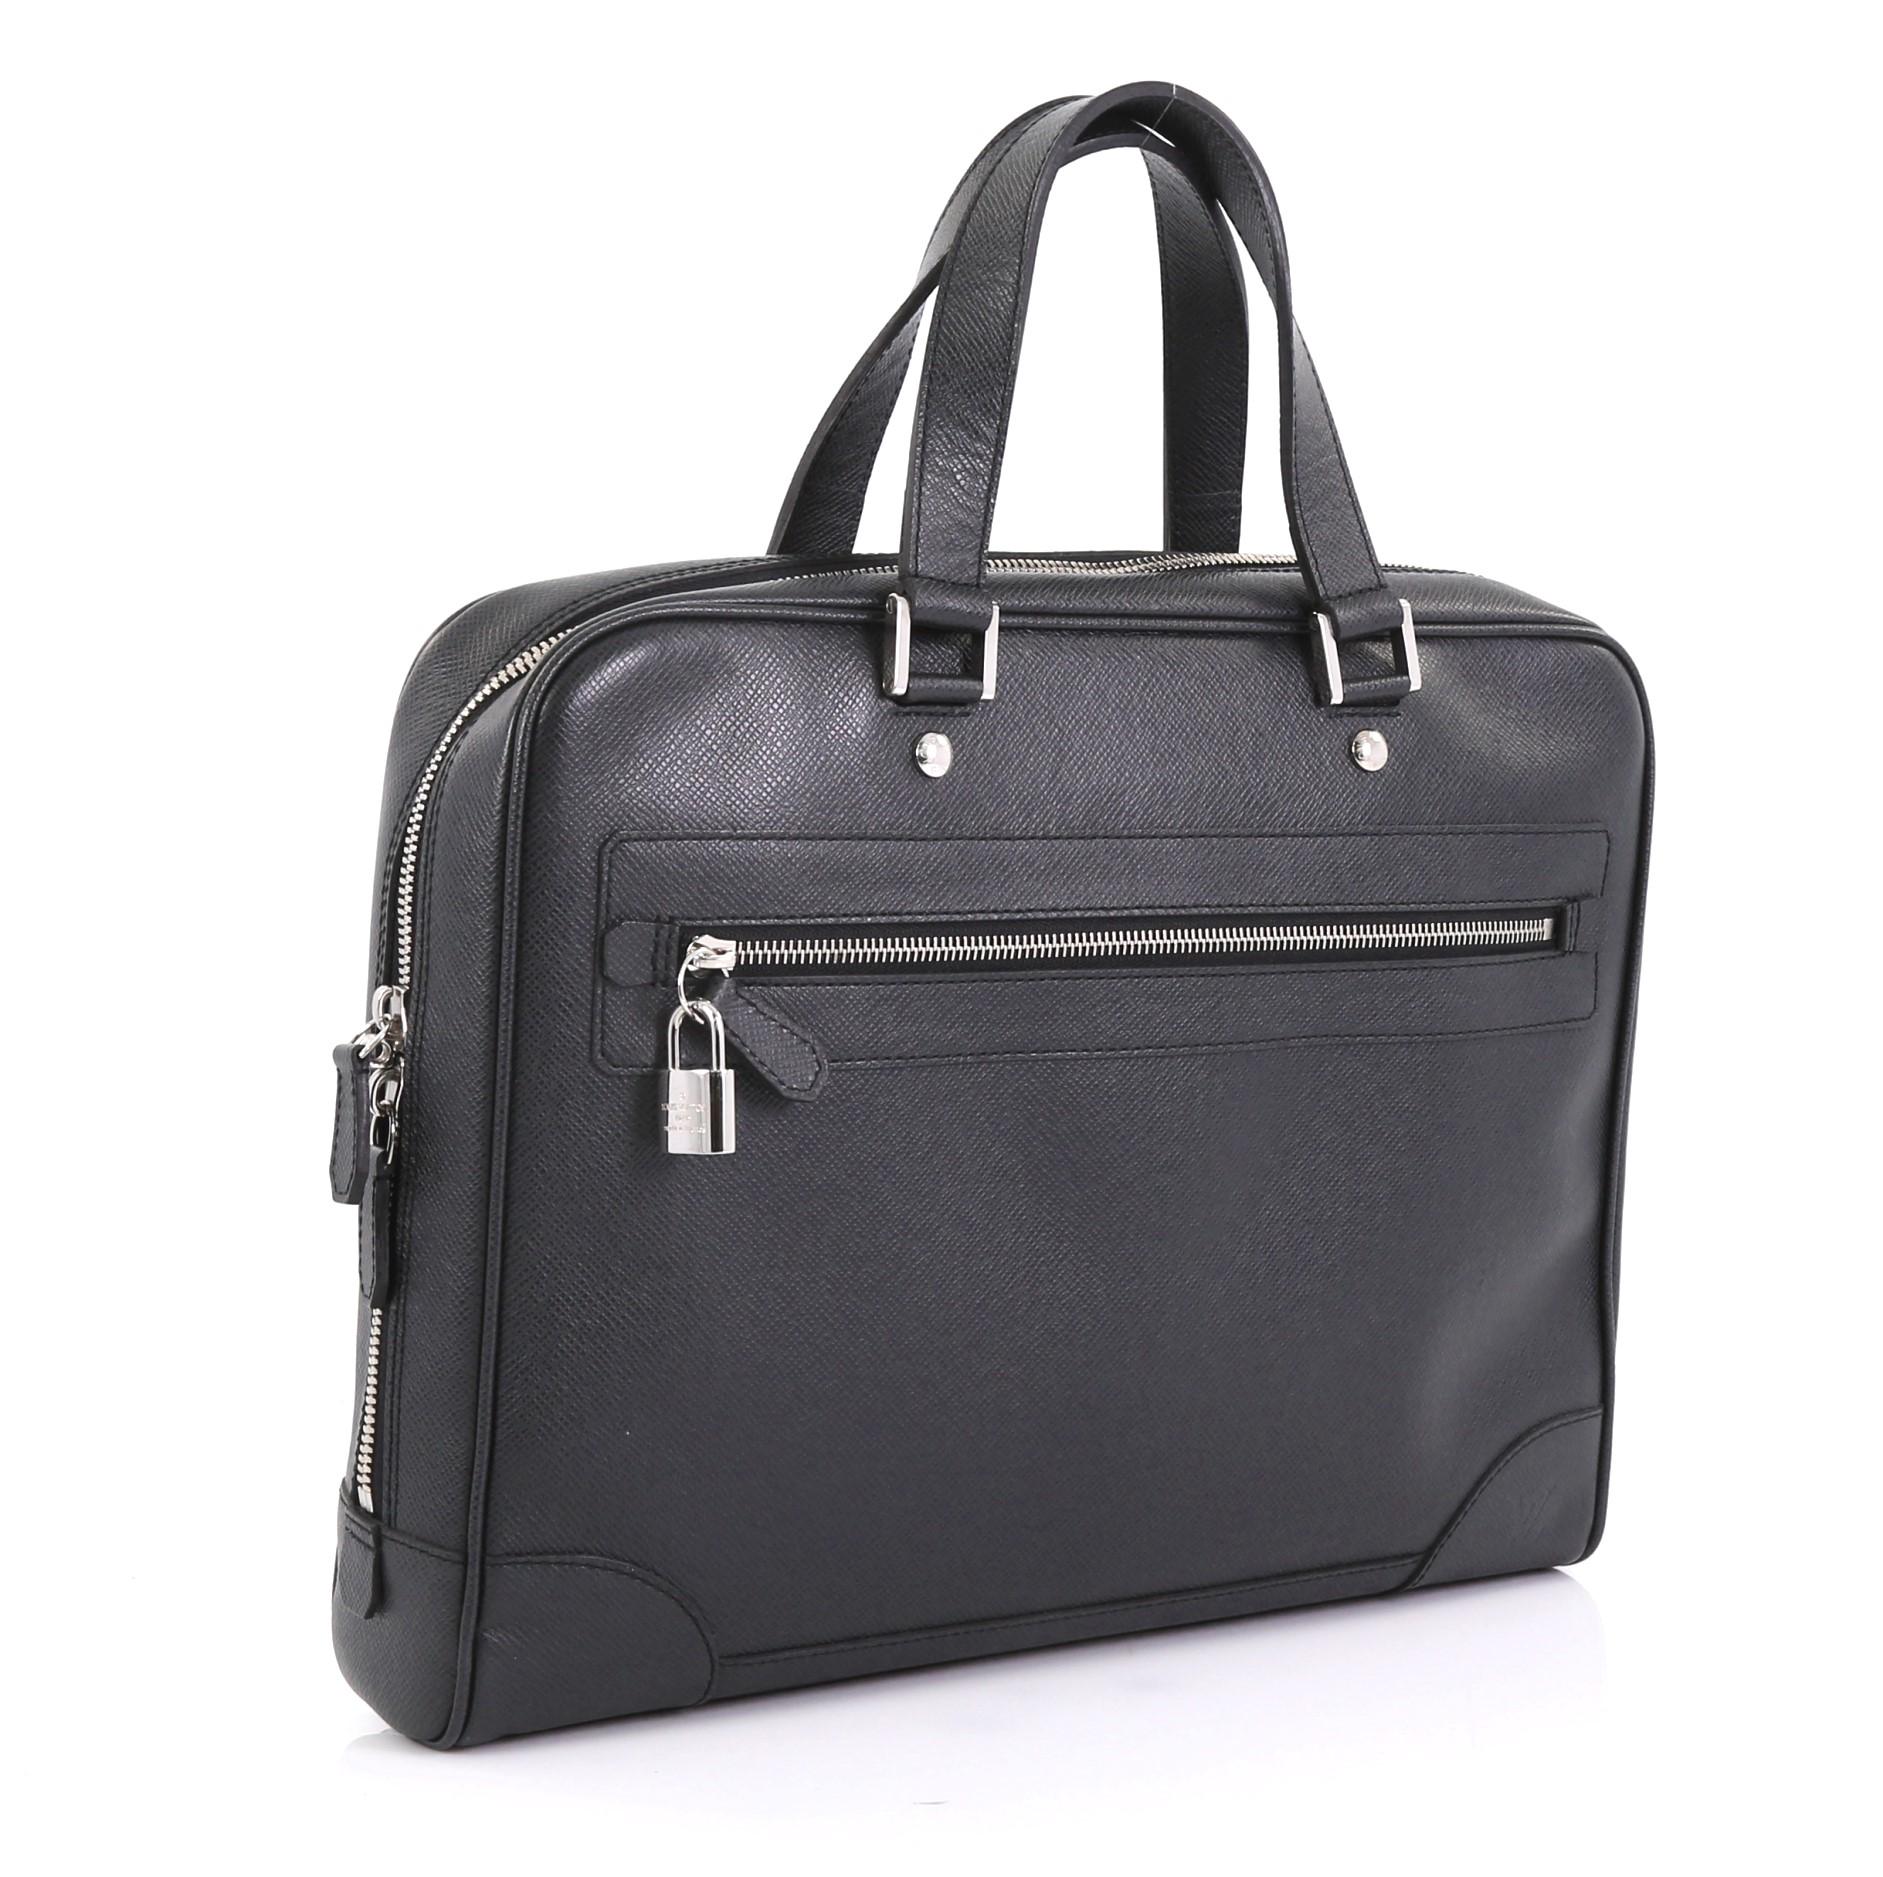 This Louis Vuitton Igor Briefcase Taiga Leather, crafted in black taiga leather, features dual flat leather handles, exterior zip pocket and silver-tone hardware. Its zip closure opens to a black fabric interior with zip and slip pockets.